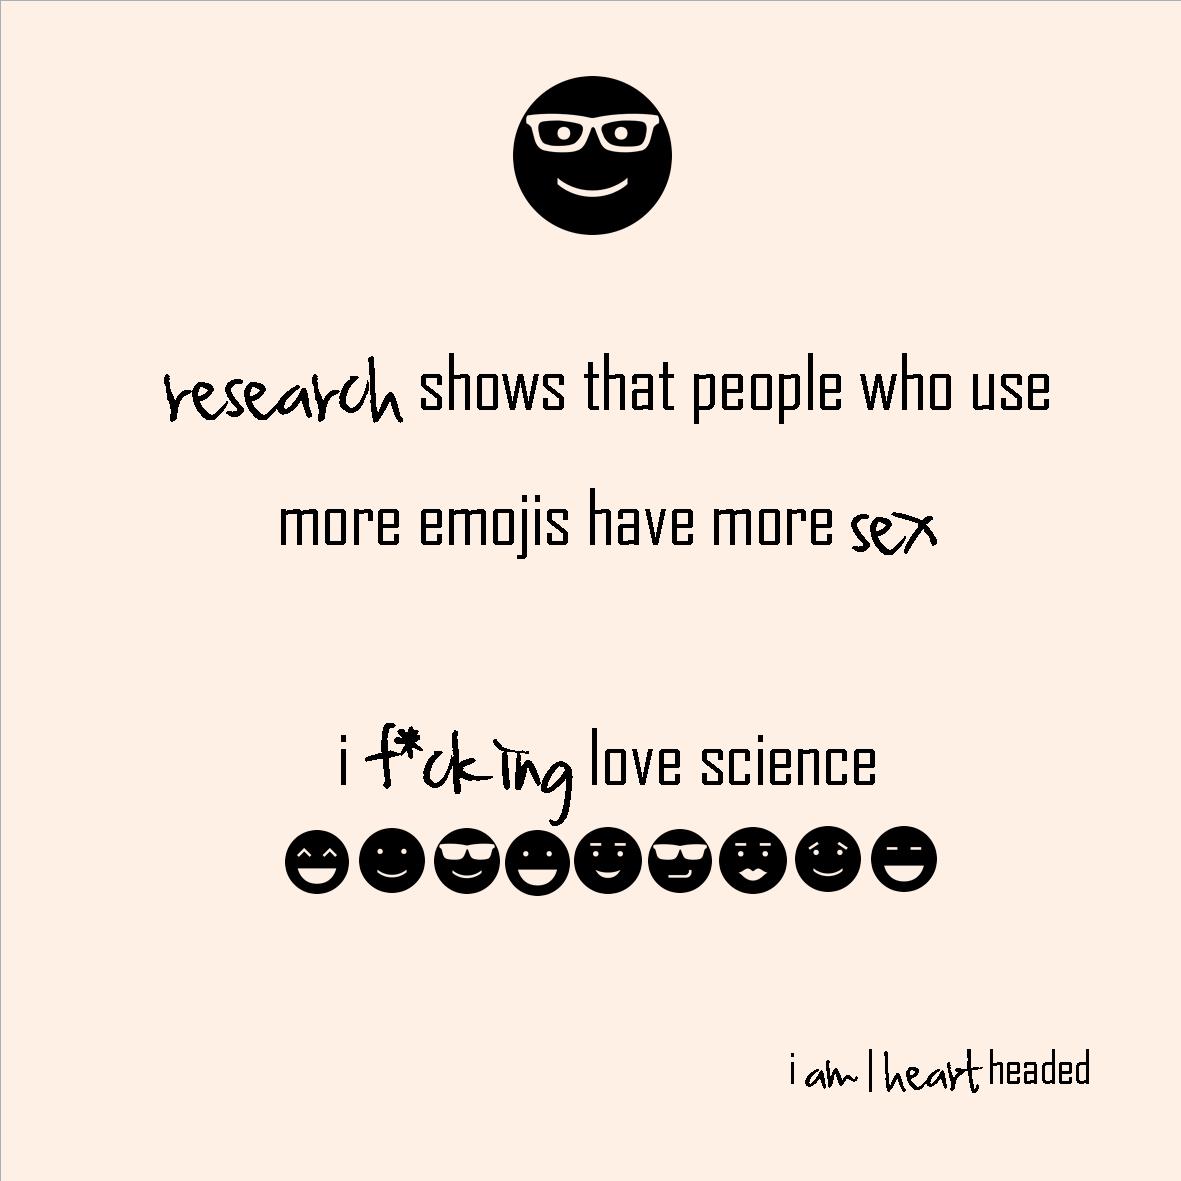 full-size featured image of quote 'i fucking love science' in category 'dirty' at i am | heart headed